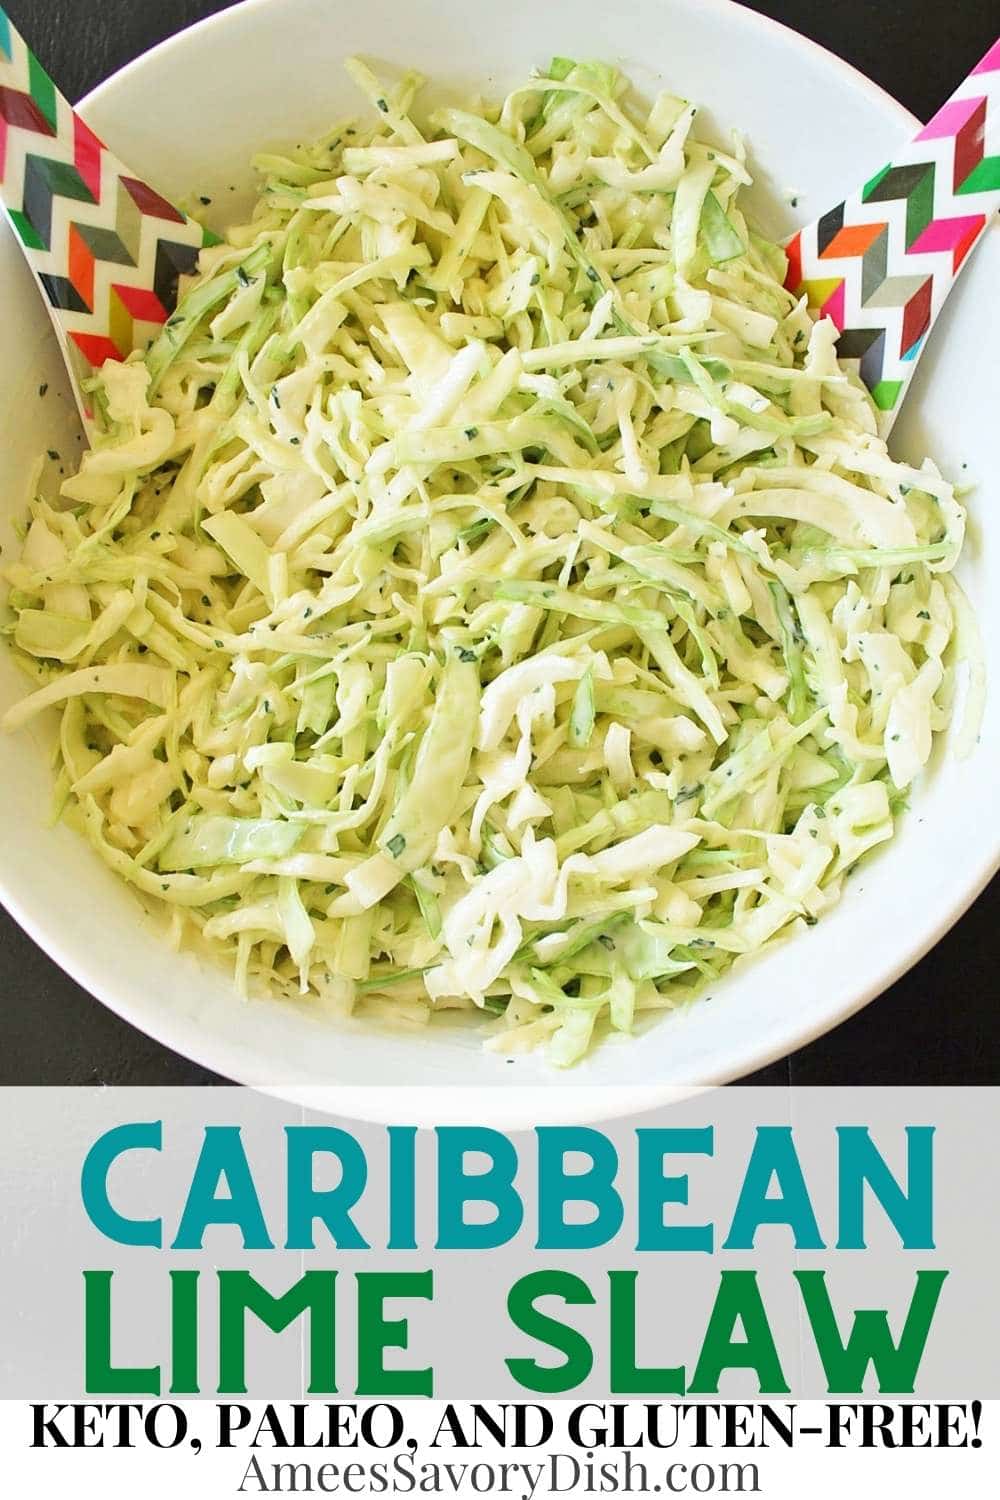 Caribbean Lime Coleslaw is a flavorful keto-friendly slaw recipe that is super easy to make. The BEST on fish tacos!! via @Ameessavorydish